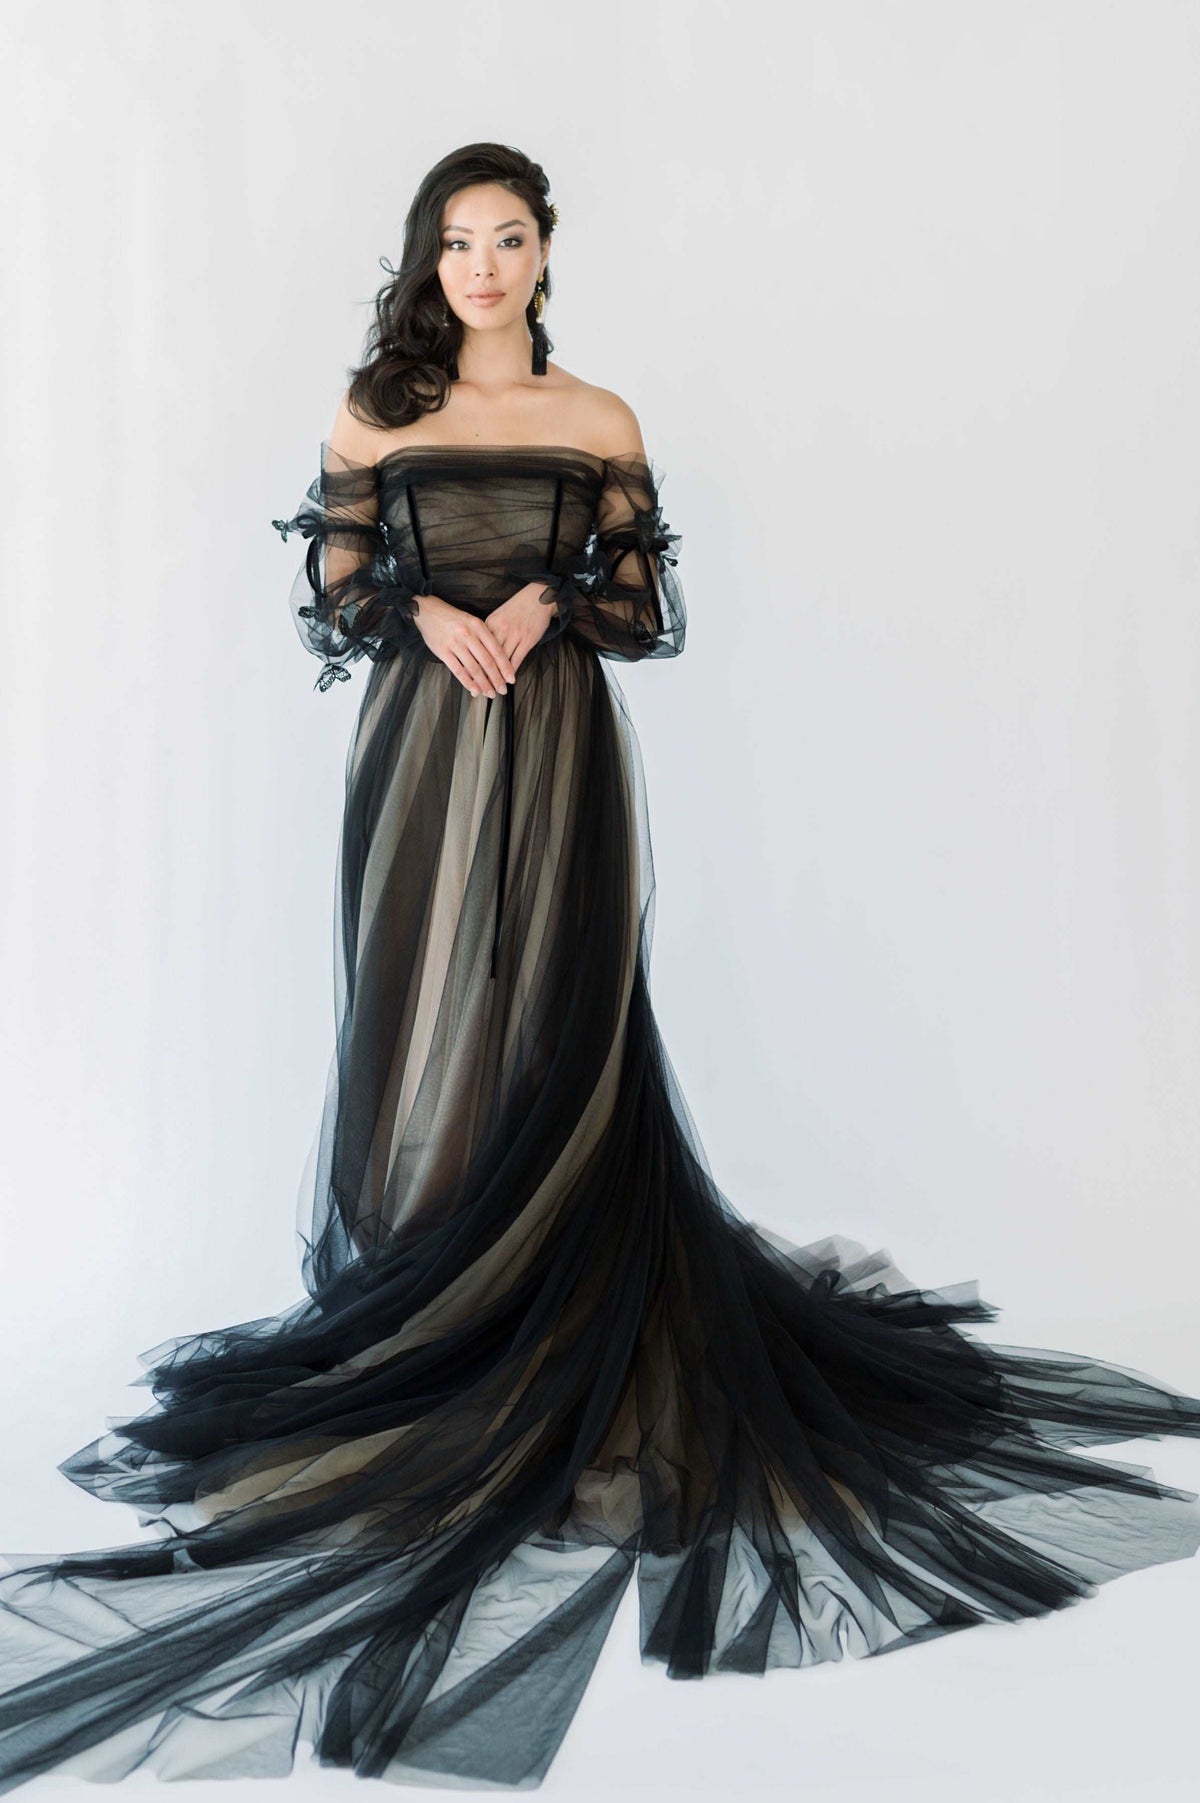 Orchid, black tulle alternative wedding gown. Goth core with a hint of whimsy. Unique wedding dress for unconventional brides. Catherine Langlois, Canada.